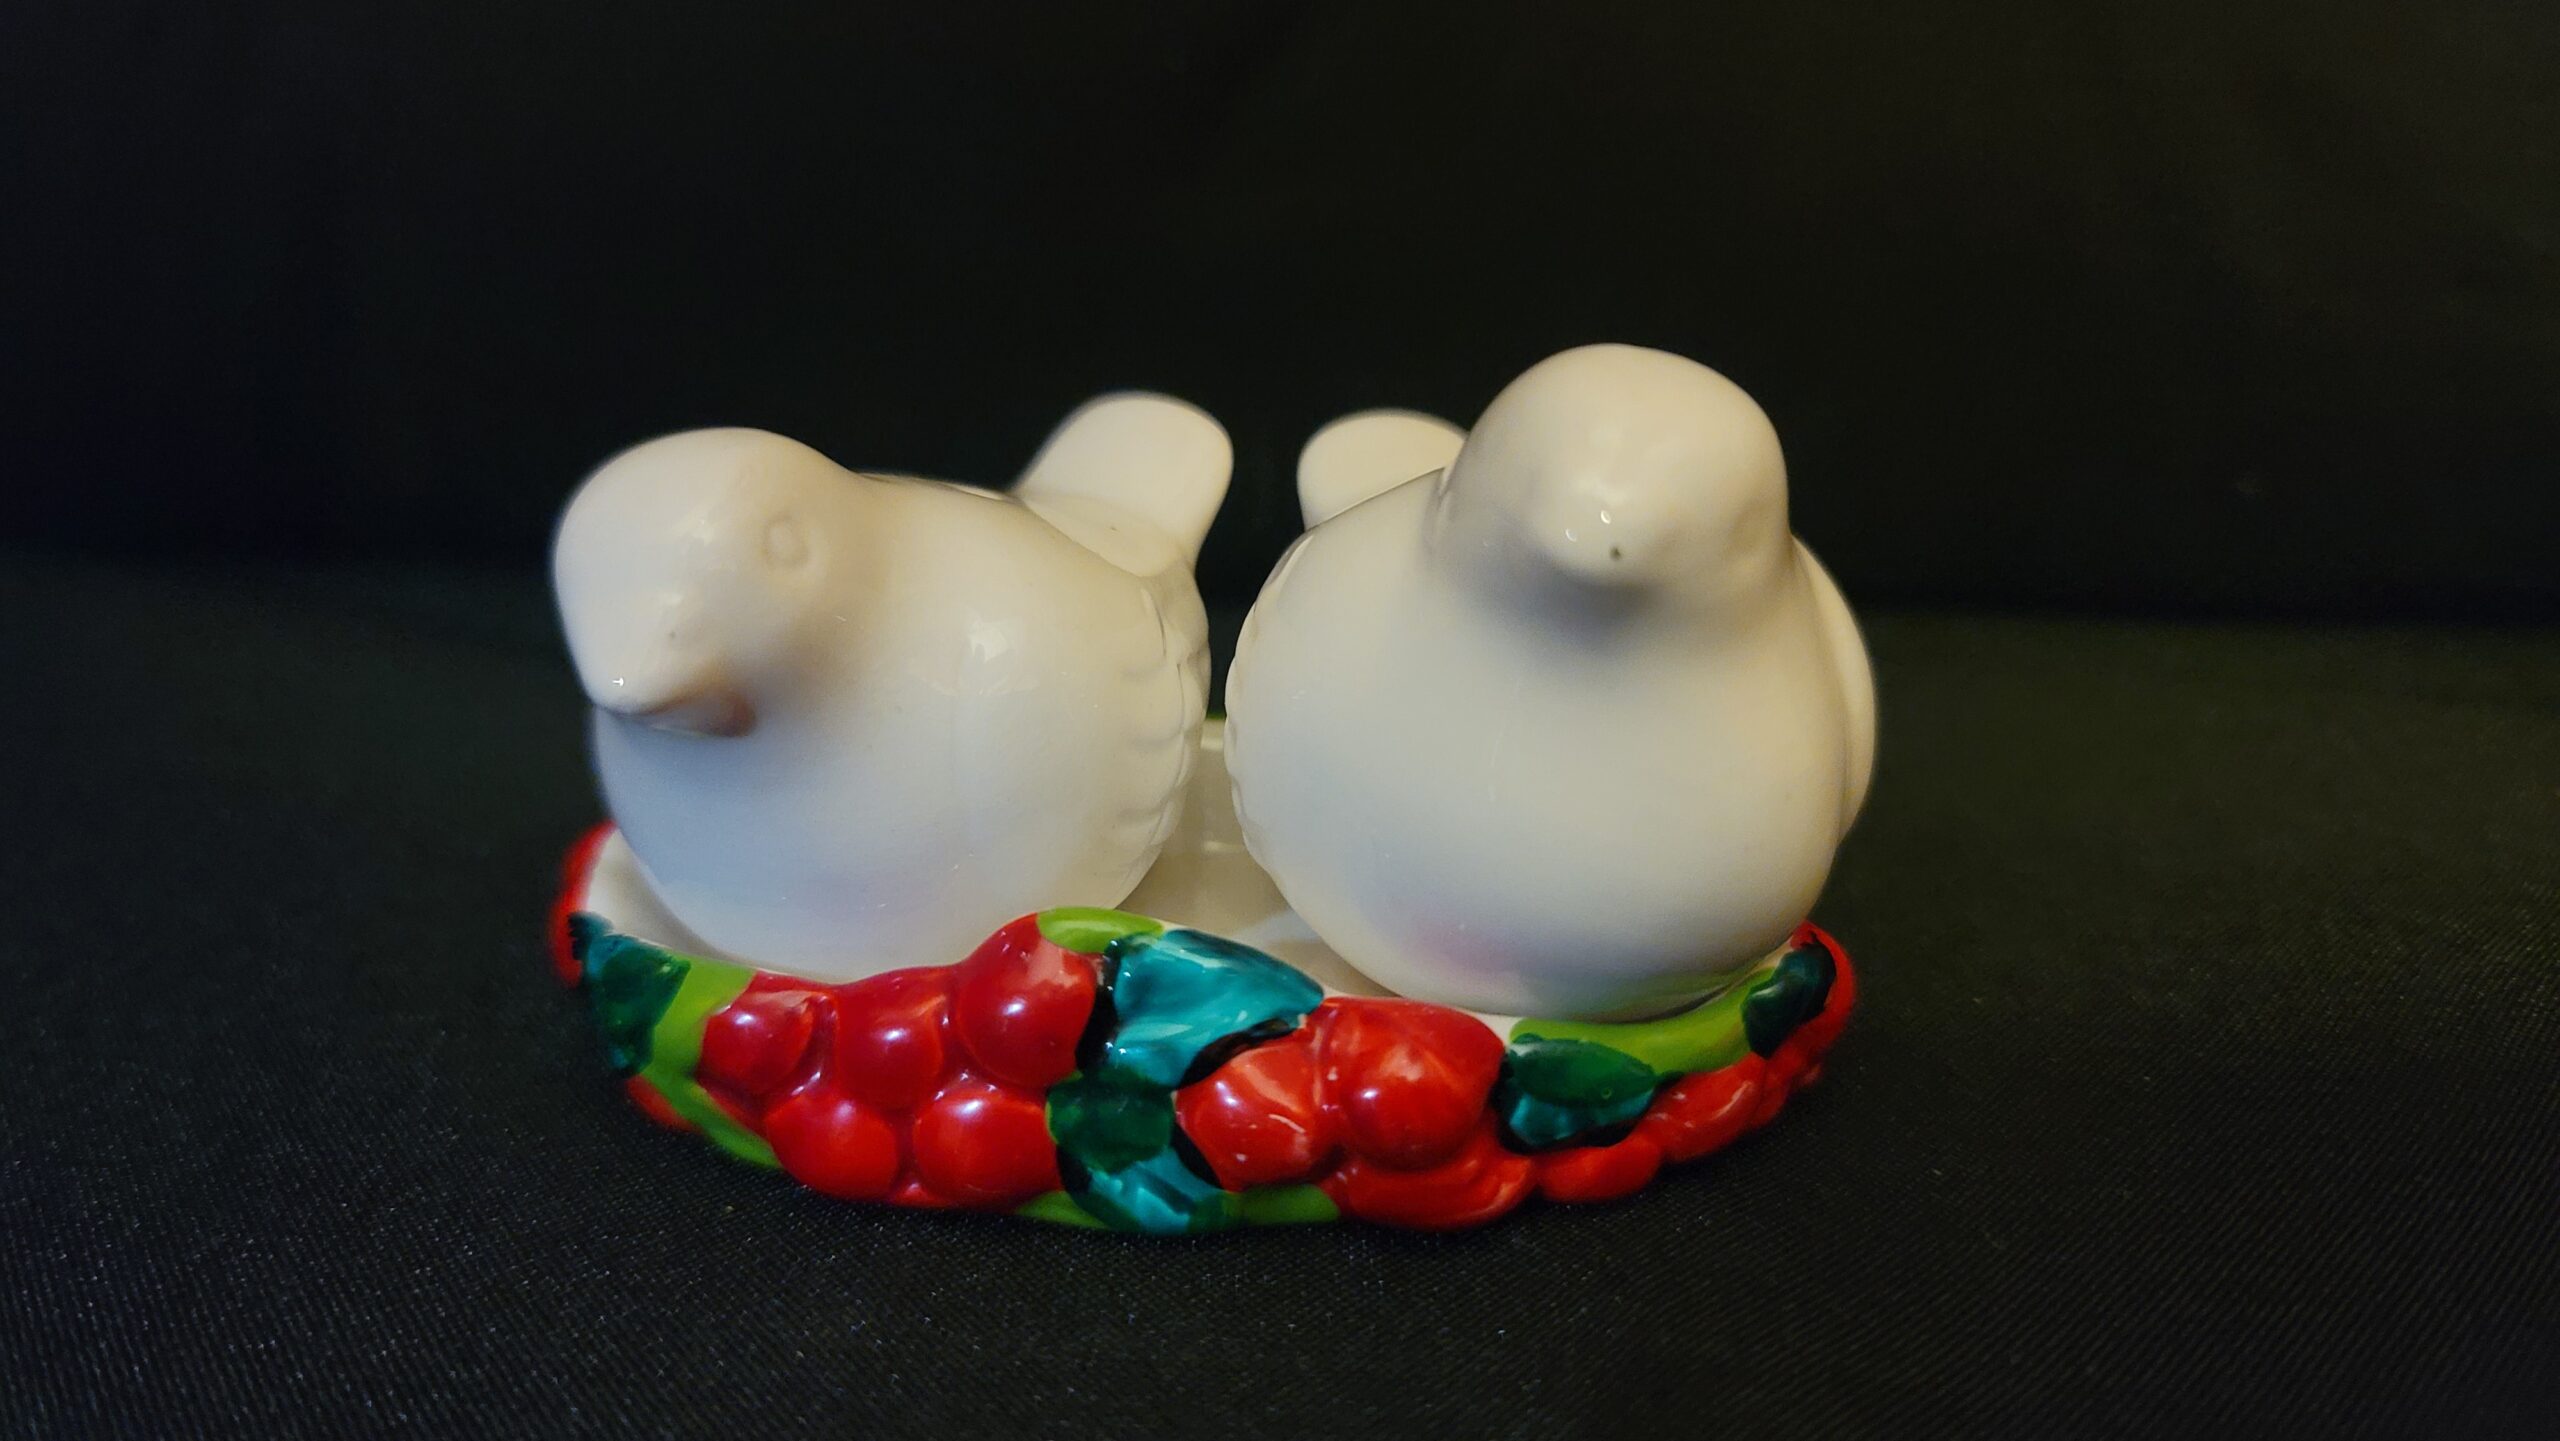 Vintage Salt and Pepper Shakers / Pair of Birds in Holly Berry Tray / 